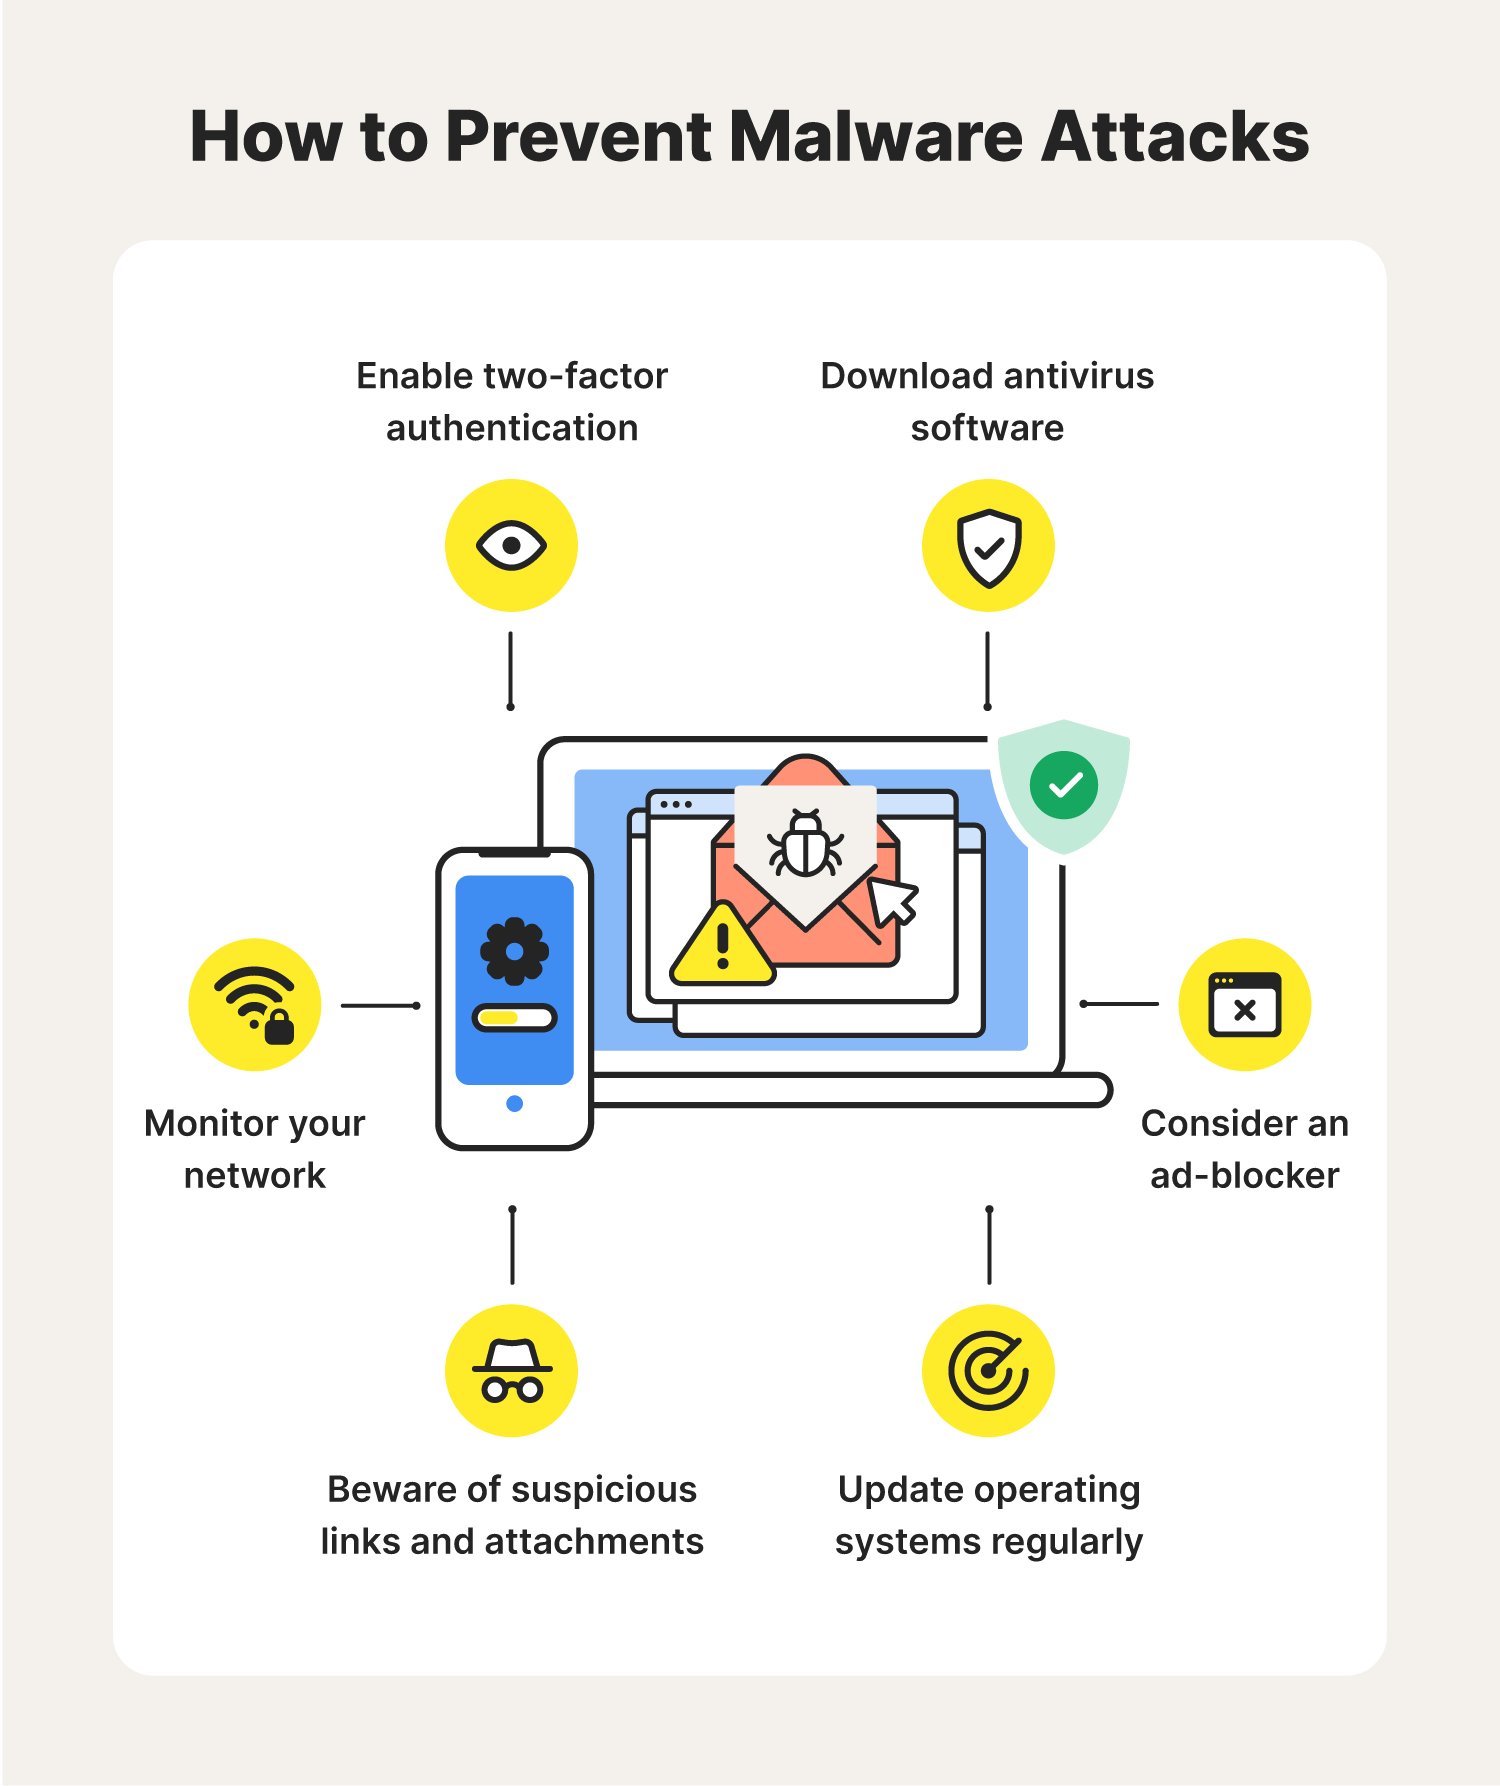 Illustrated chart with tips for preventing malware attacks, including using security software, using 2FA, and more.